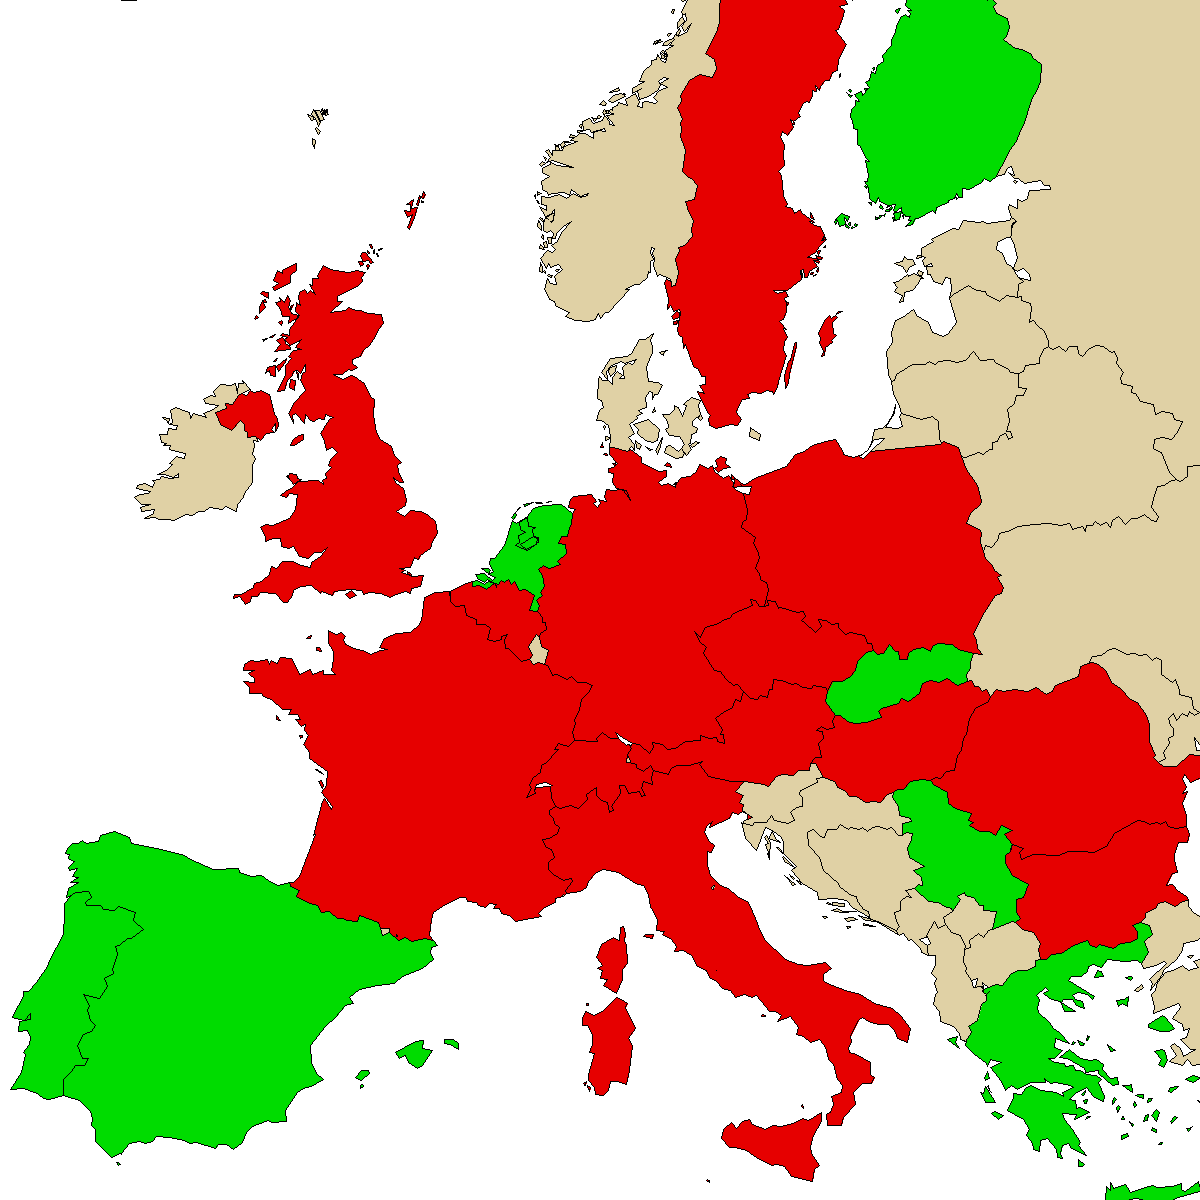 legal info map for our product NEP, green are countries with no ban, red with ban, grey is unknown